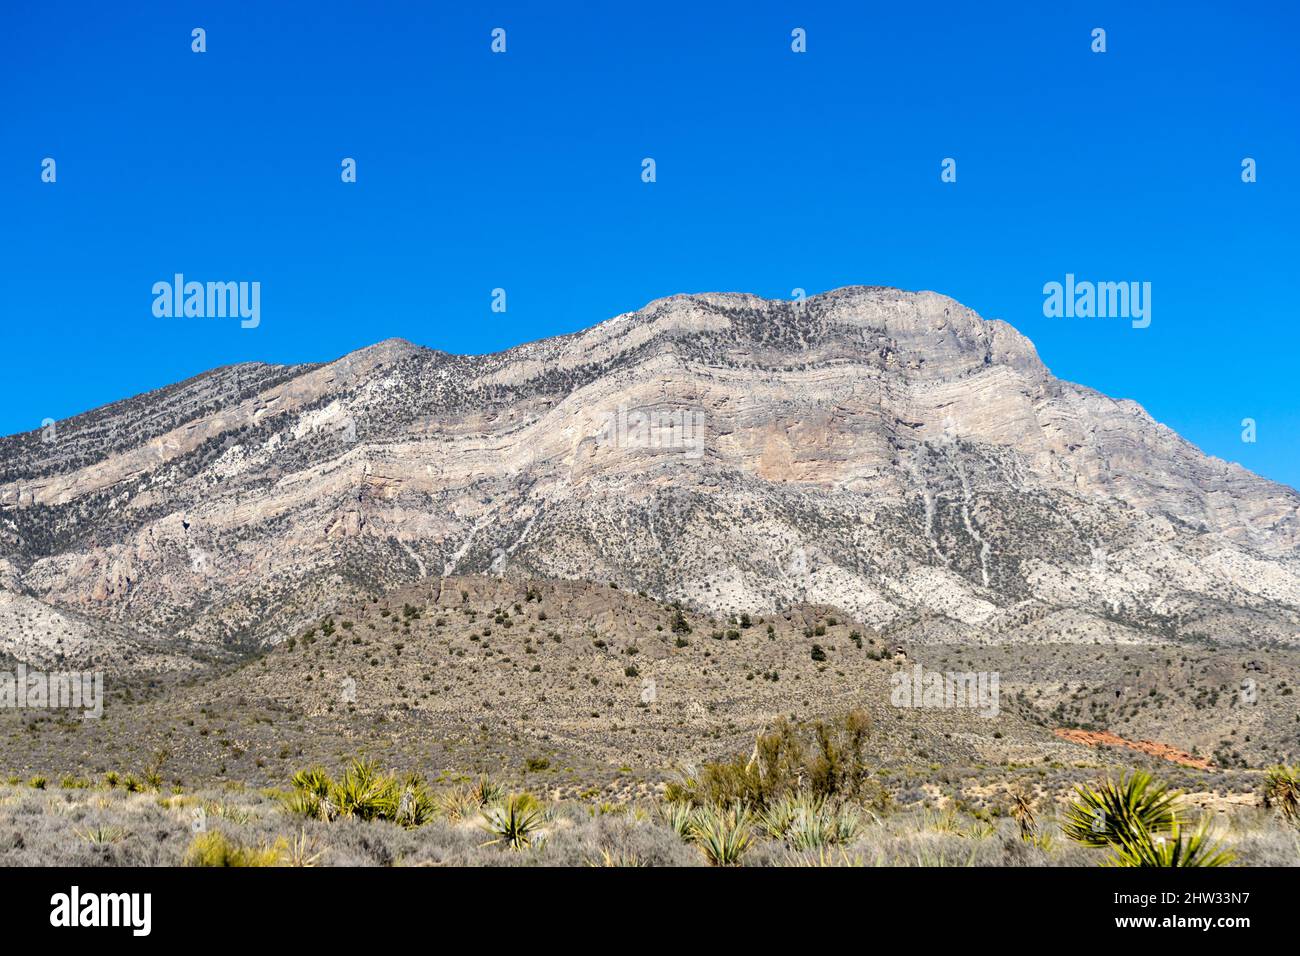 Landscape view of Turtlehead Mountain in Southern Nevada Stock Photo